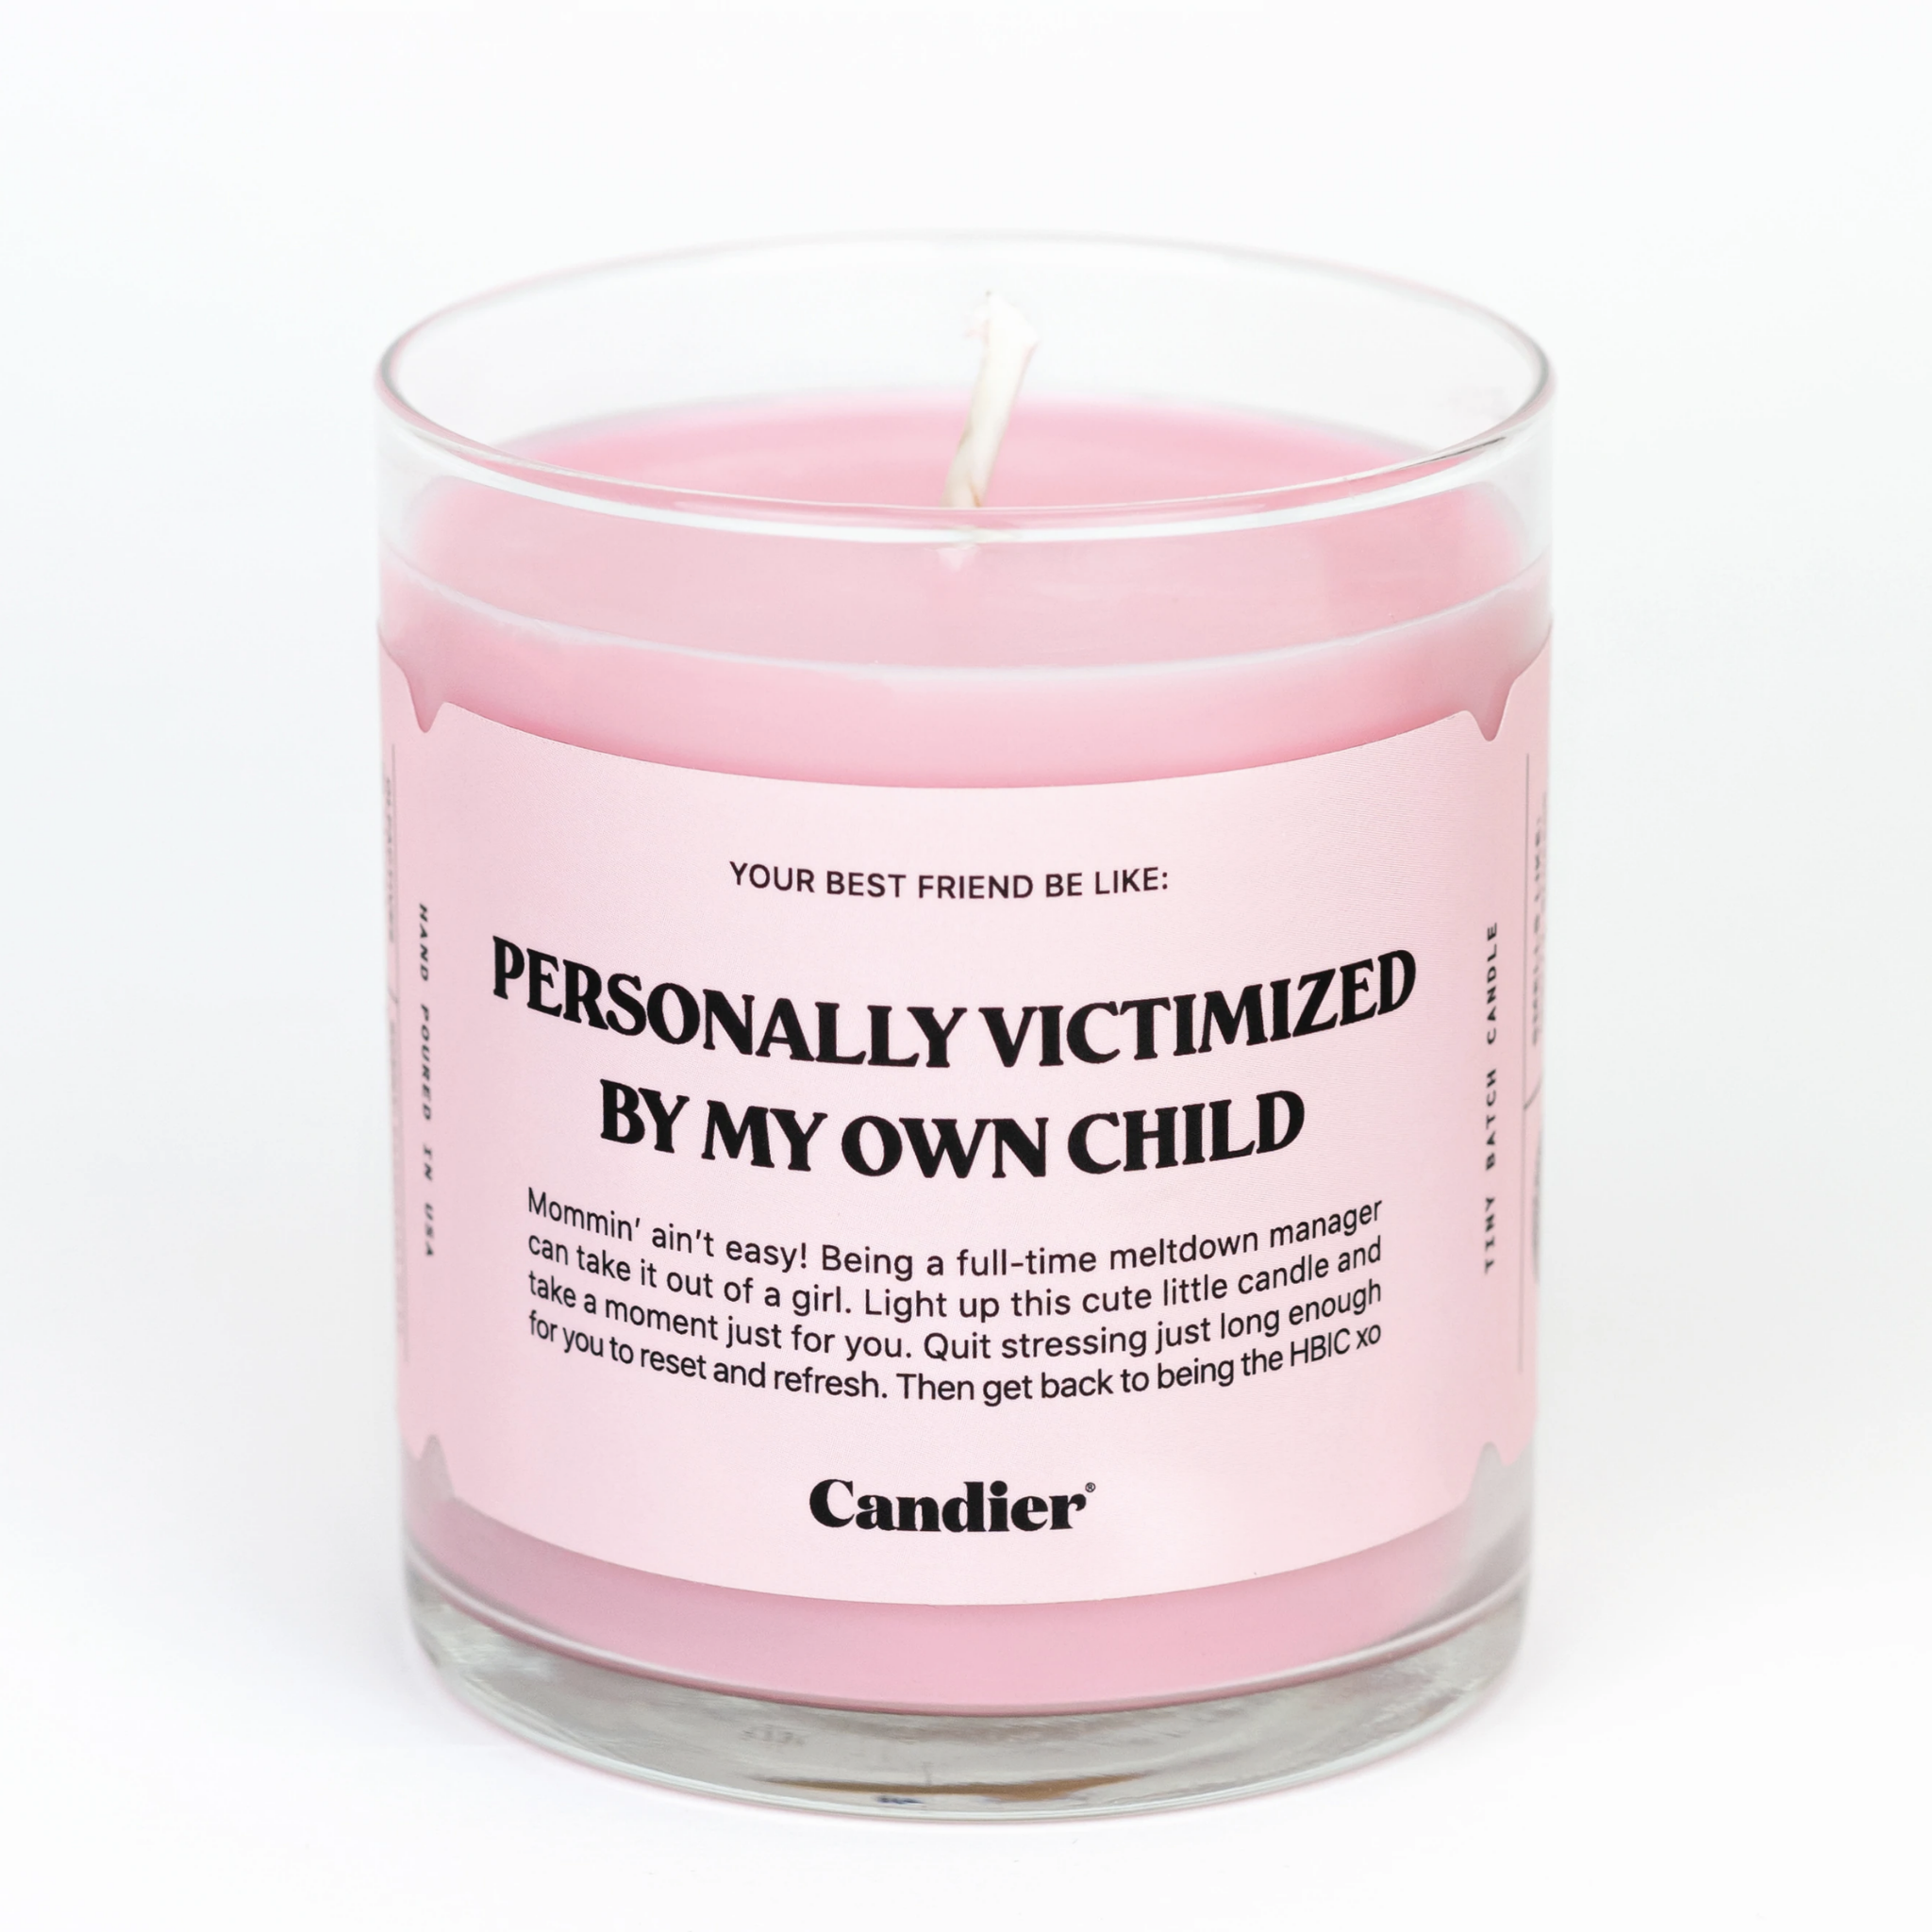 PERSONALLY VICTIMIZED CANDLE